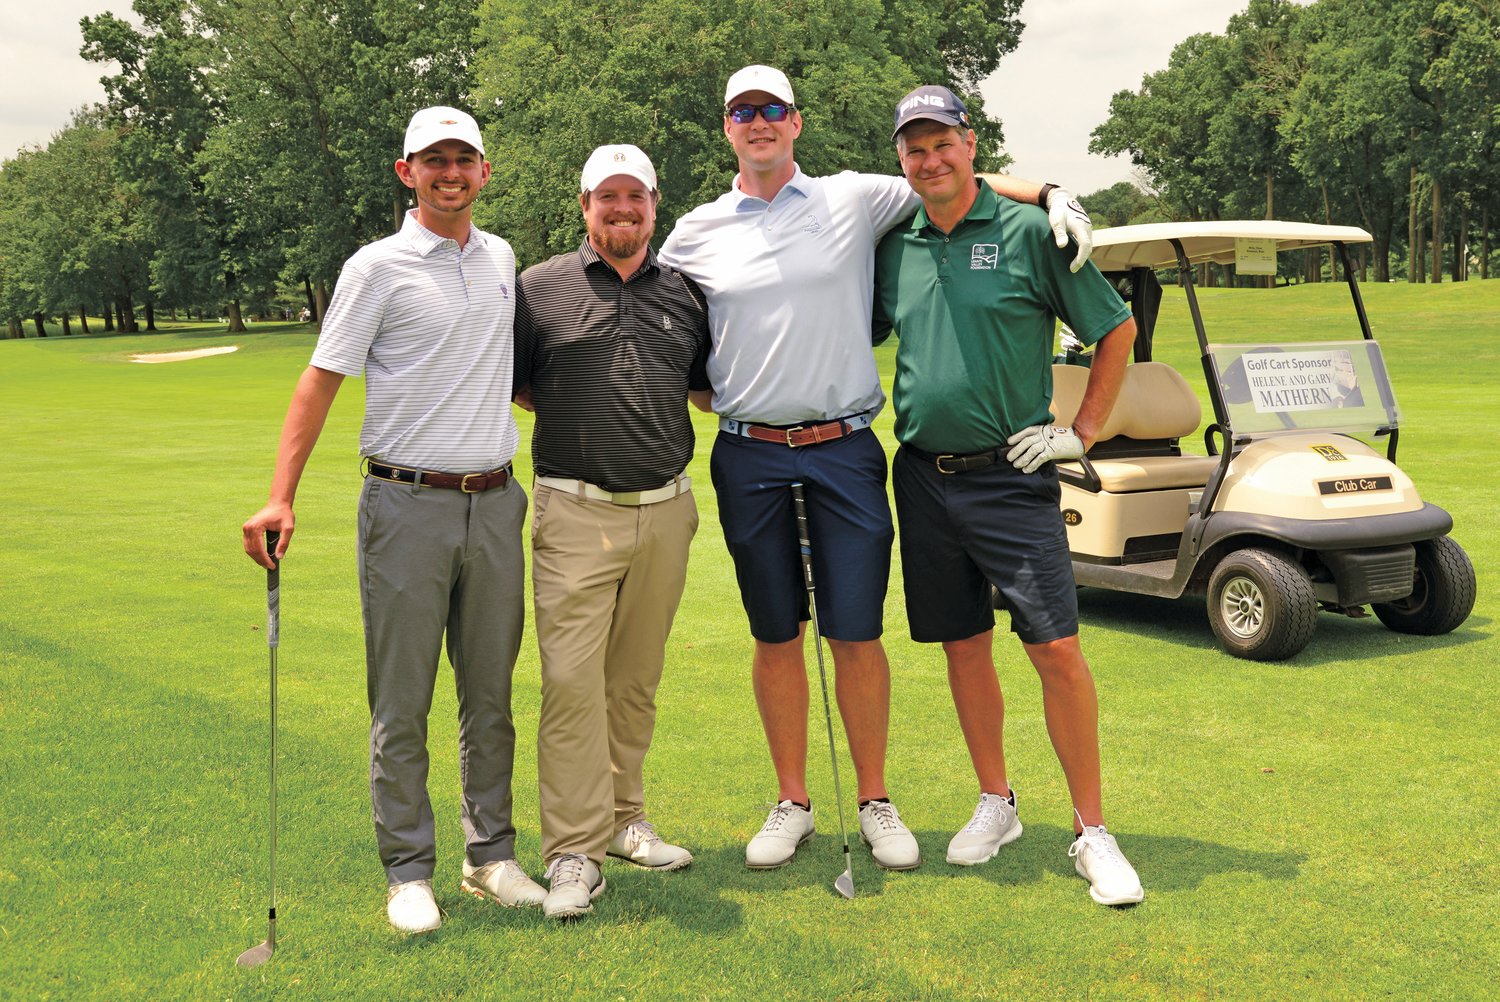 The first-place golf foursome: from left, Jerry Haftmann, Oliver White, Brian Ehresman and John Ehresman.